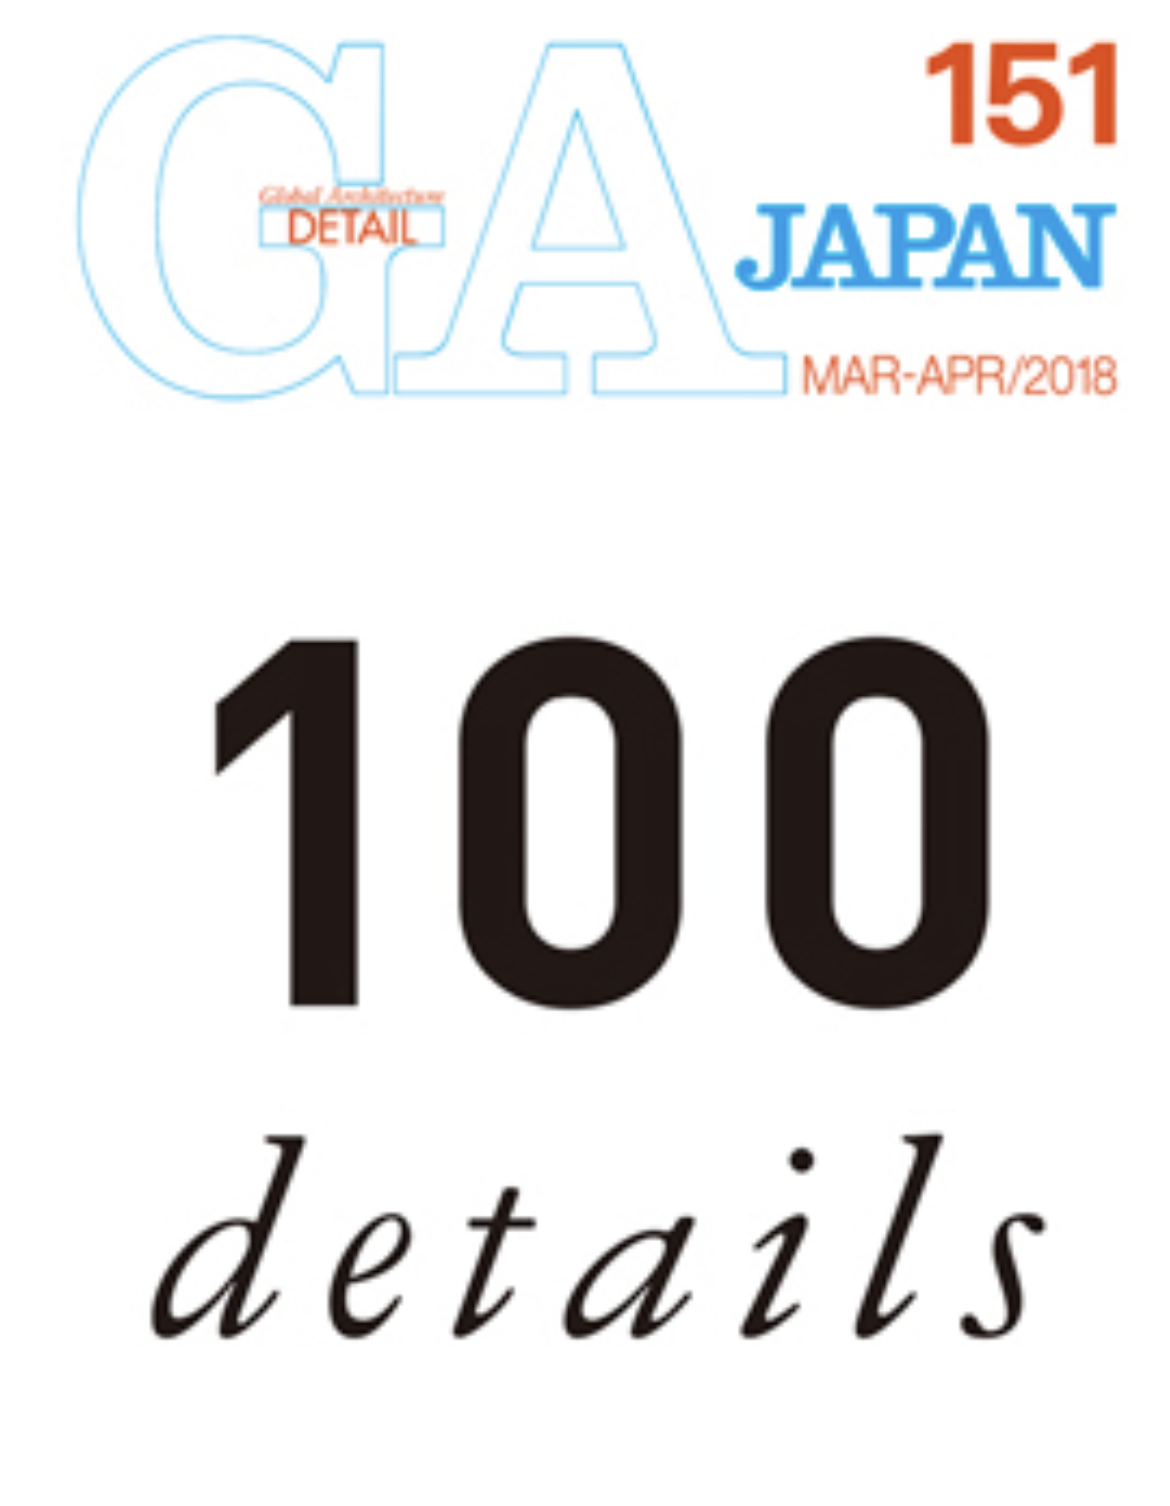 ‘Agri Chapel’ was published in GA JAPAN 151